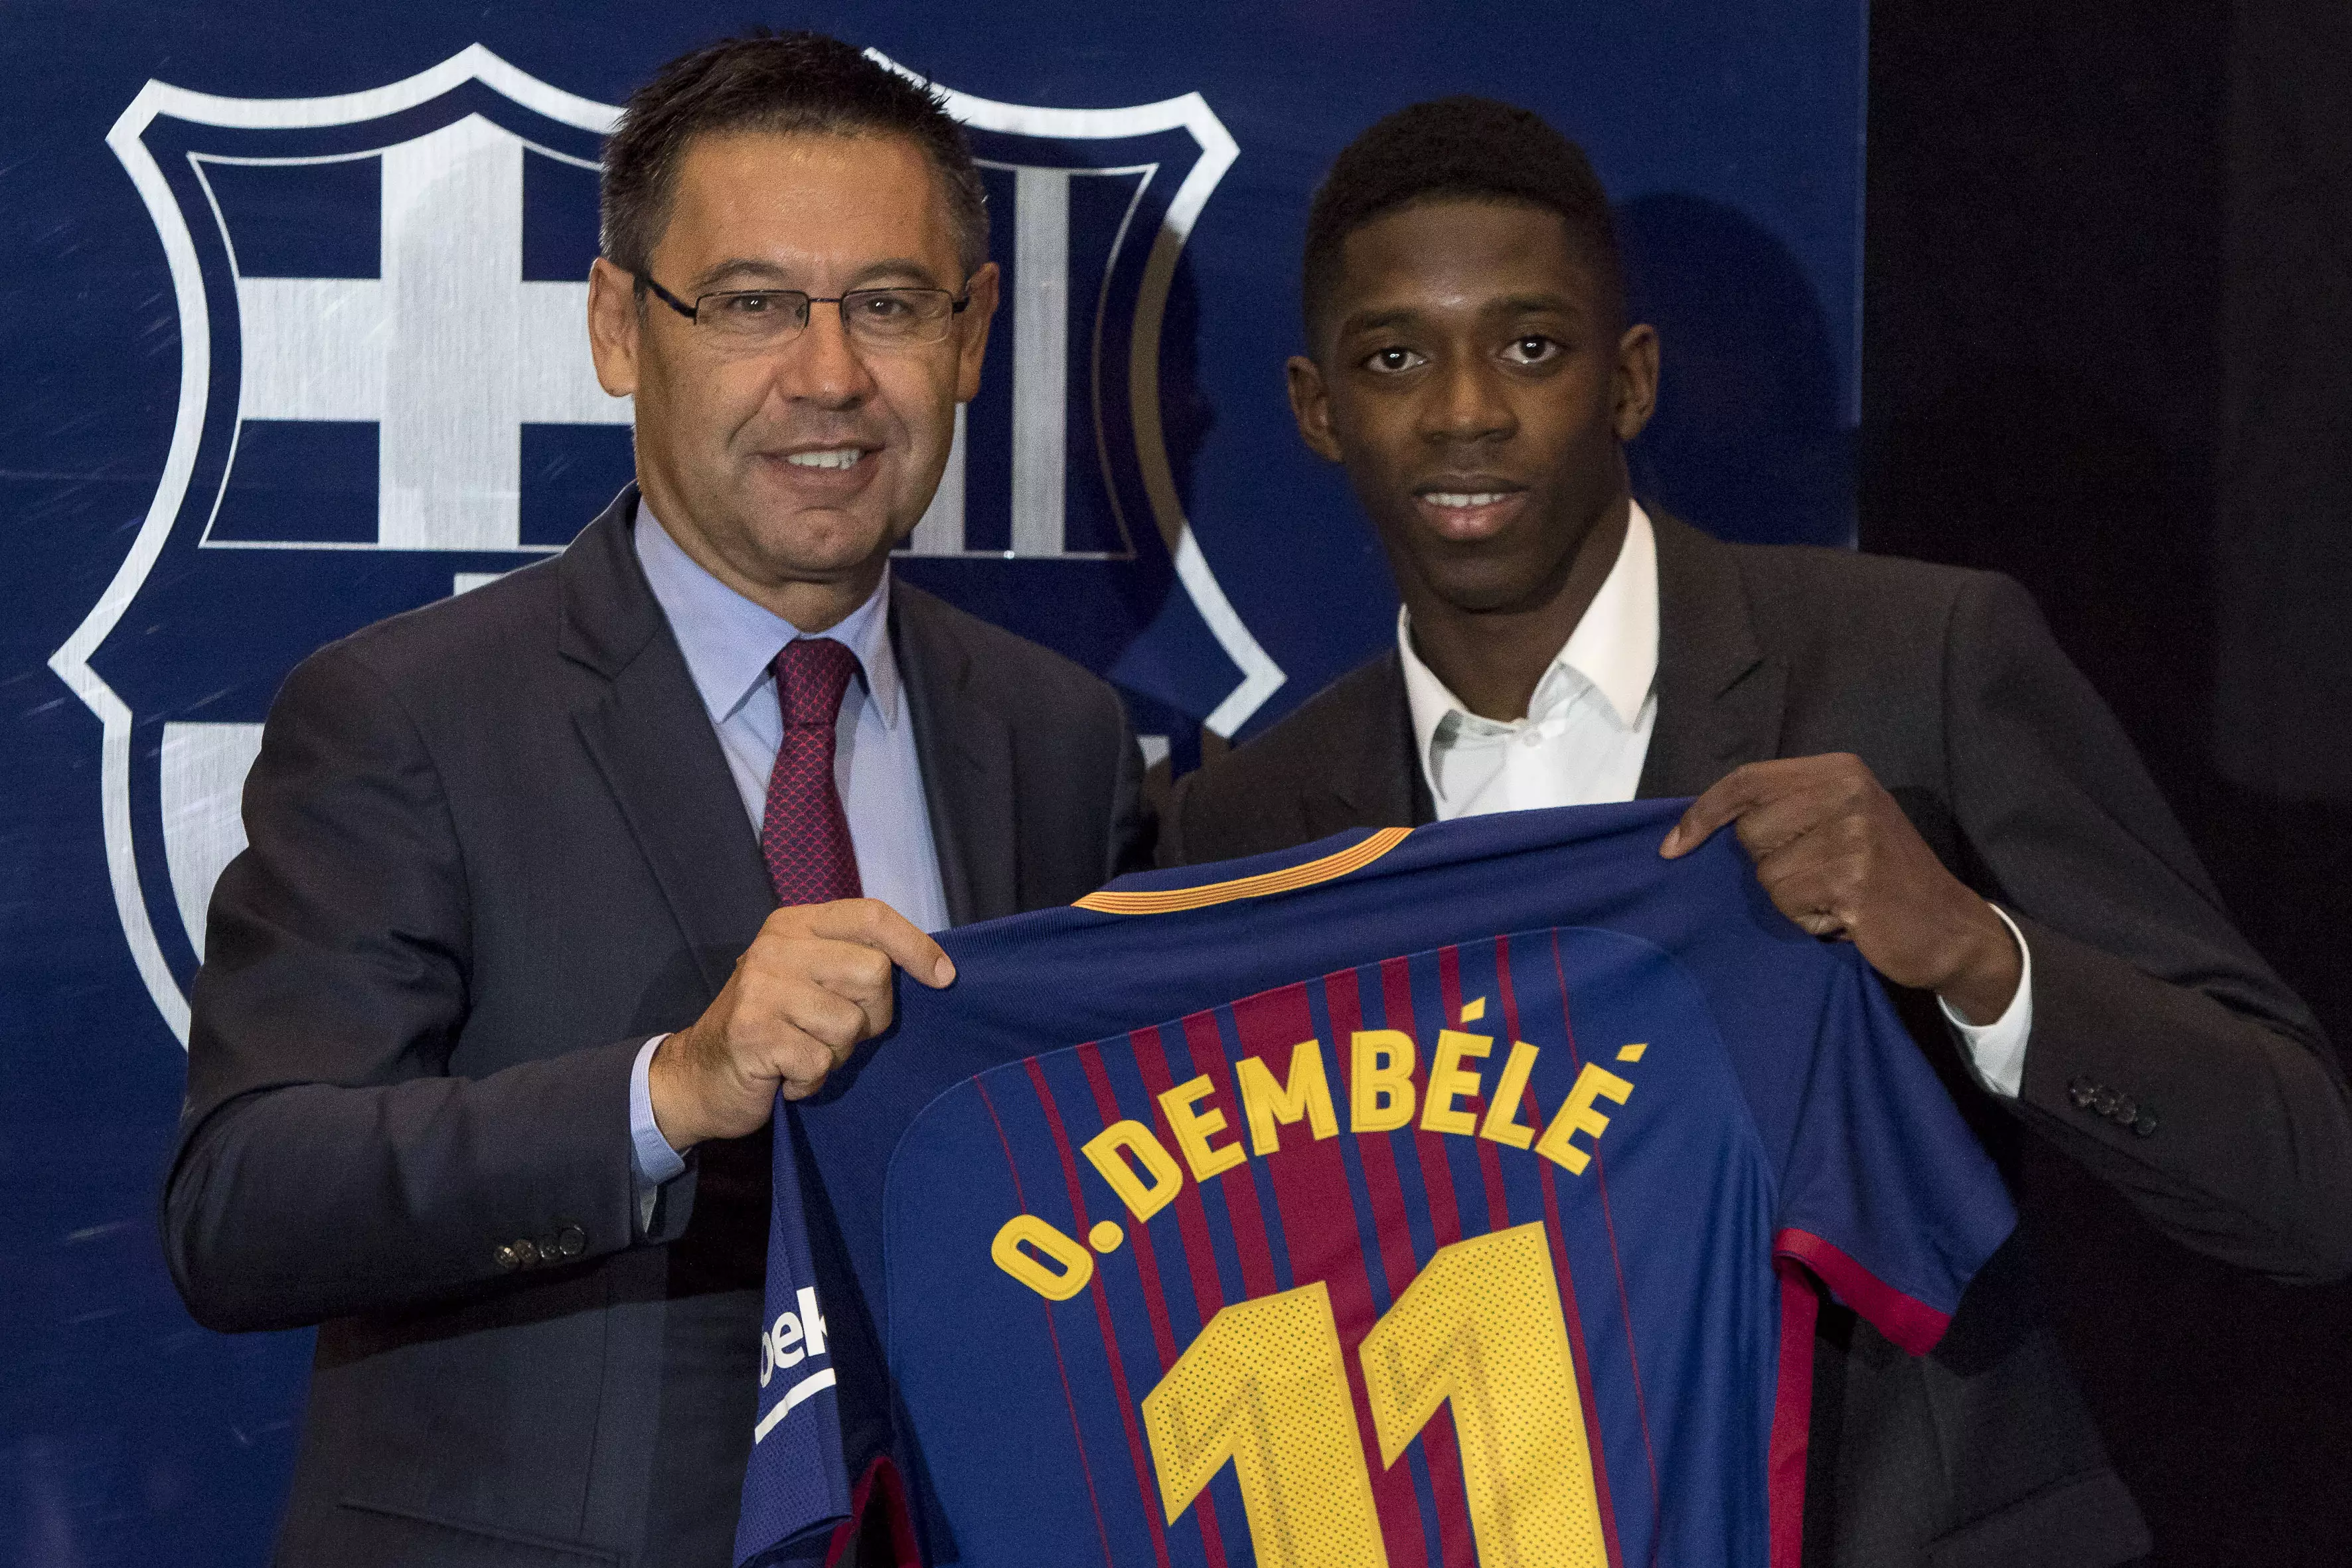 Dembele holds up a Barcelona shirt during his unveiling. Image: PA